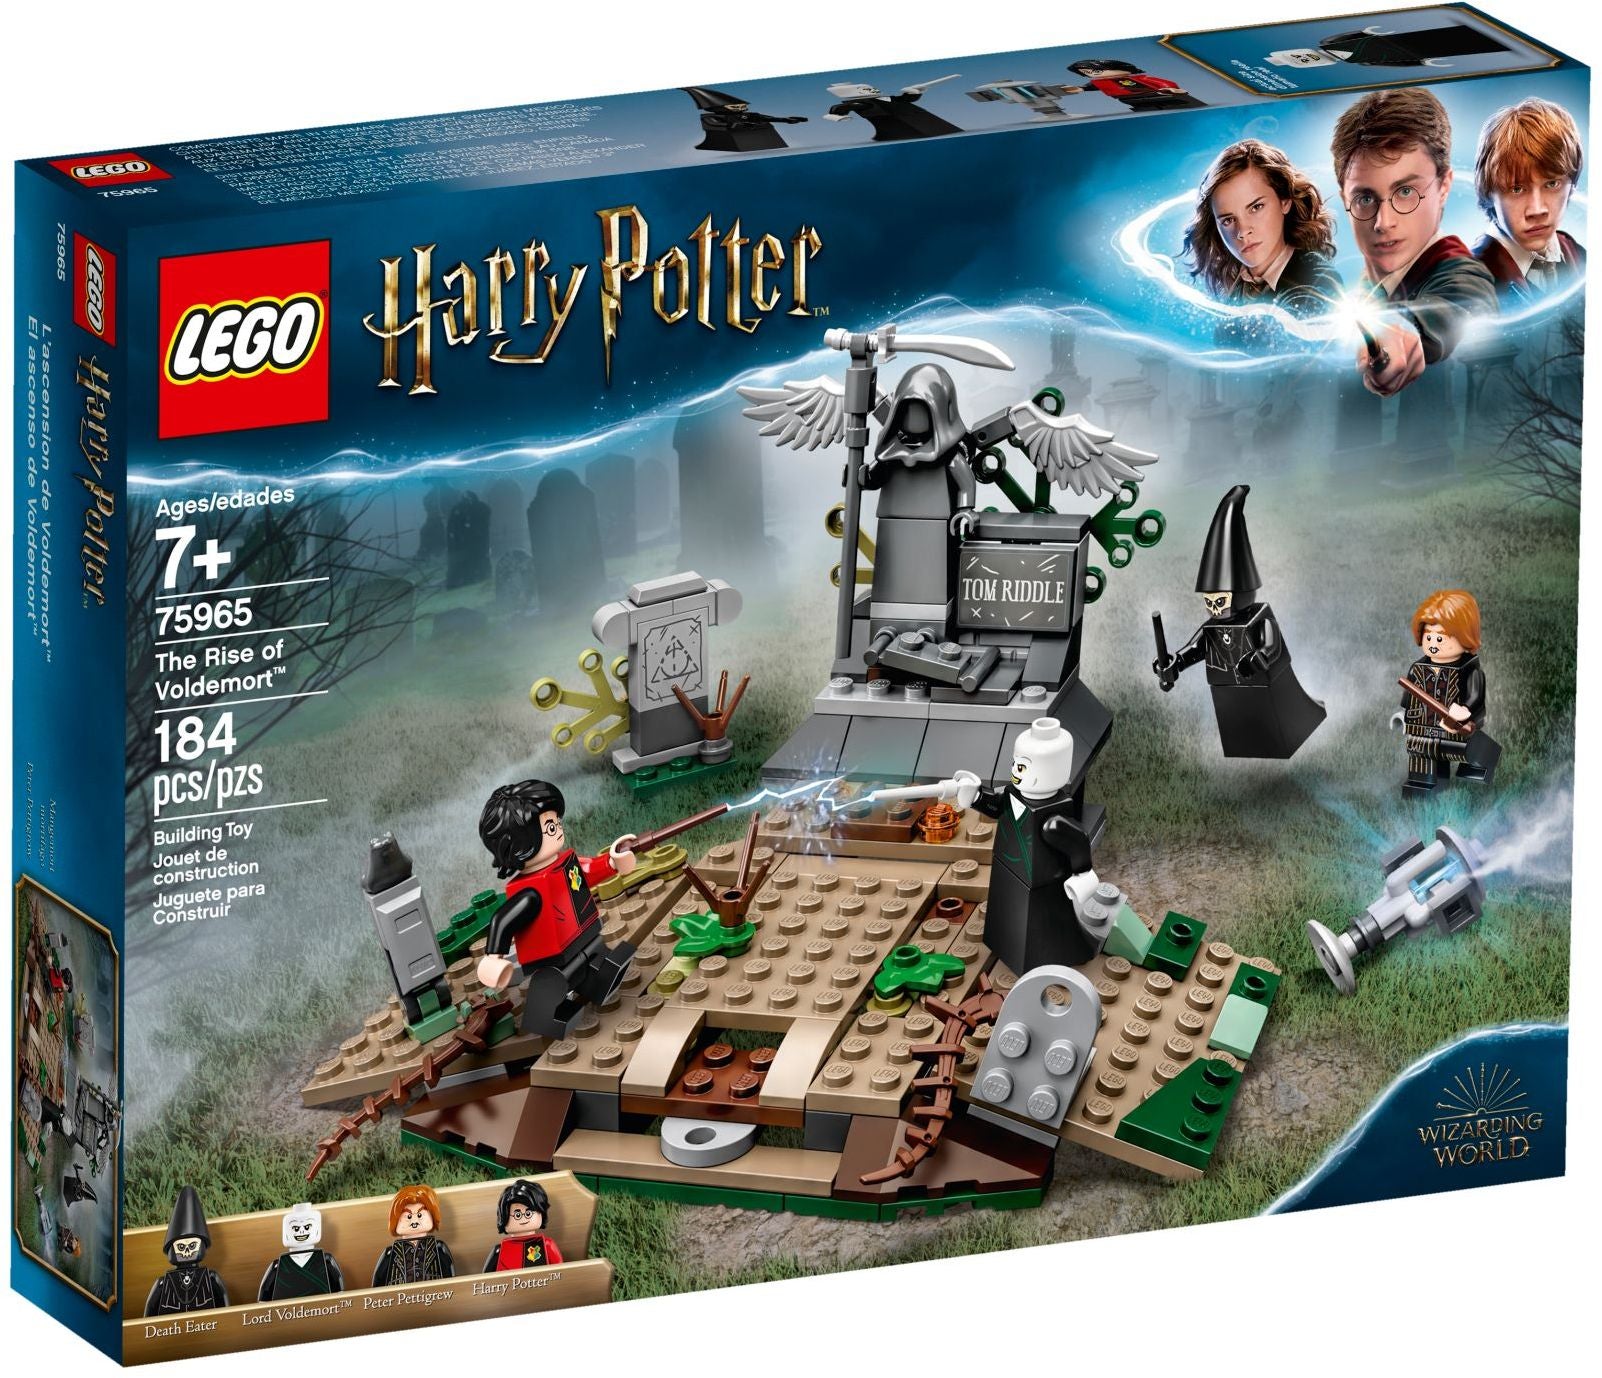 Lego Harry Potter 75965 - The Rise of Voldemort